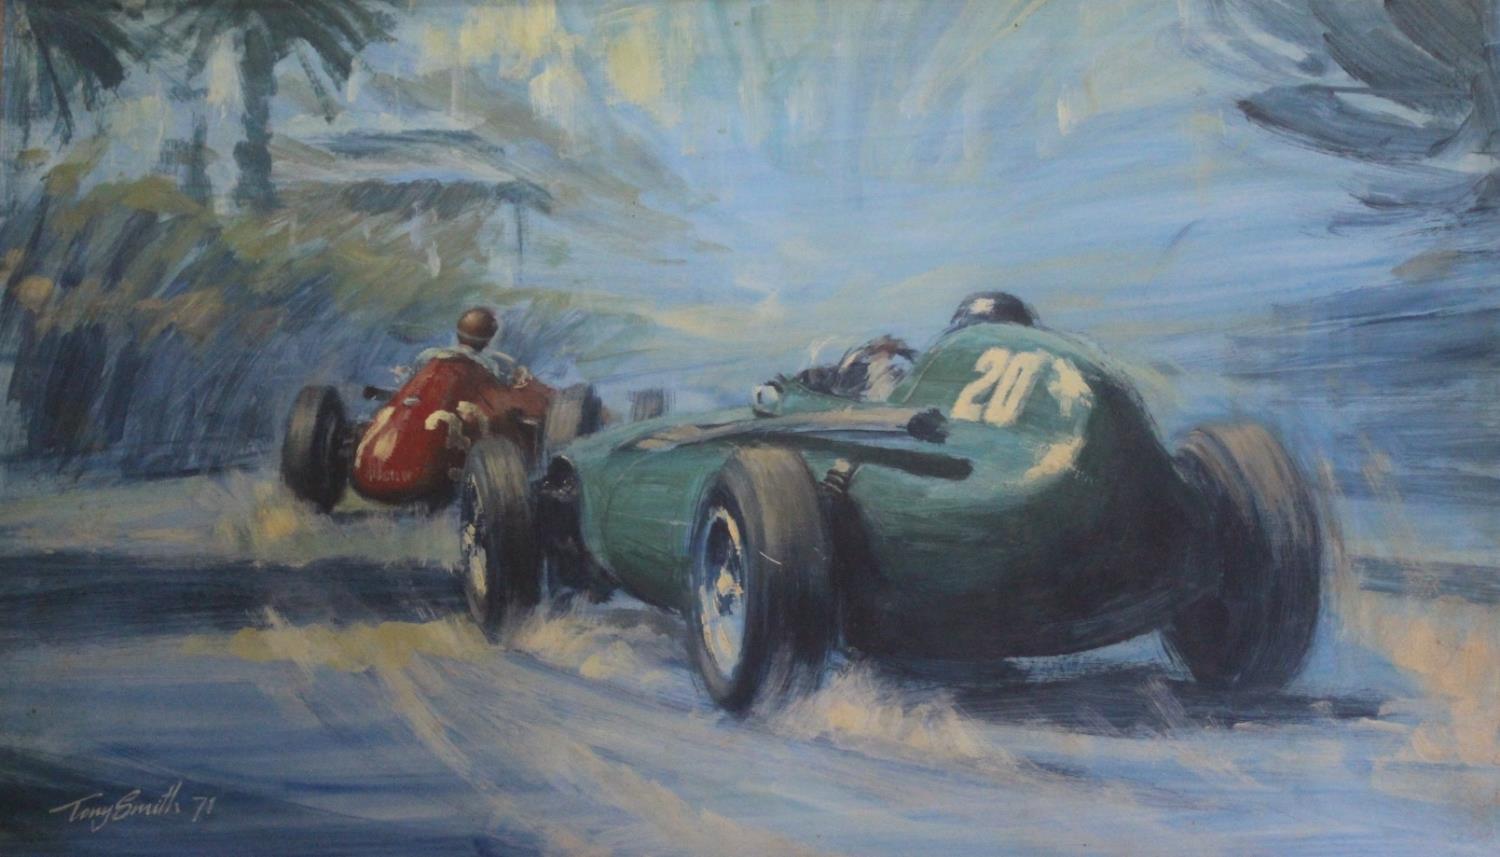 •TONY SMITH SYRACUSE GRAND PRIX, 1955 Signed and dated 71, oil on board 37 x 63.5cm.